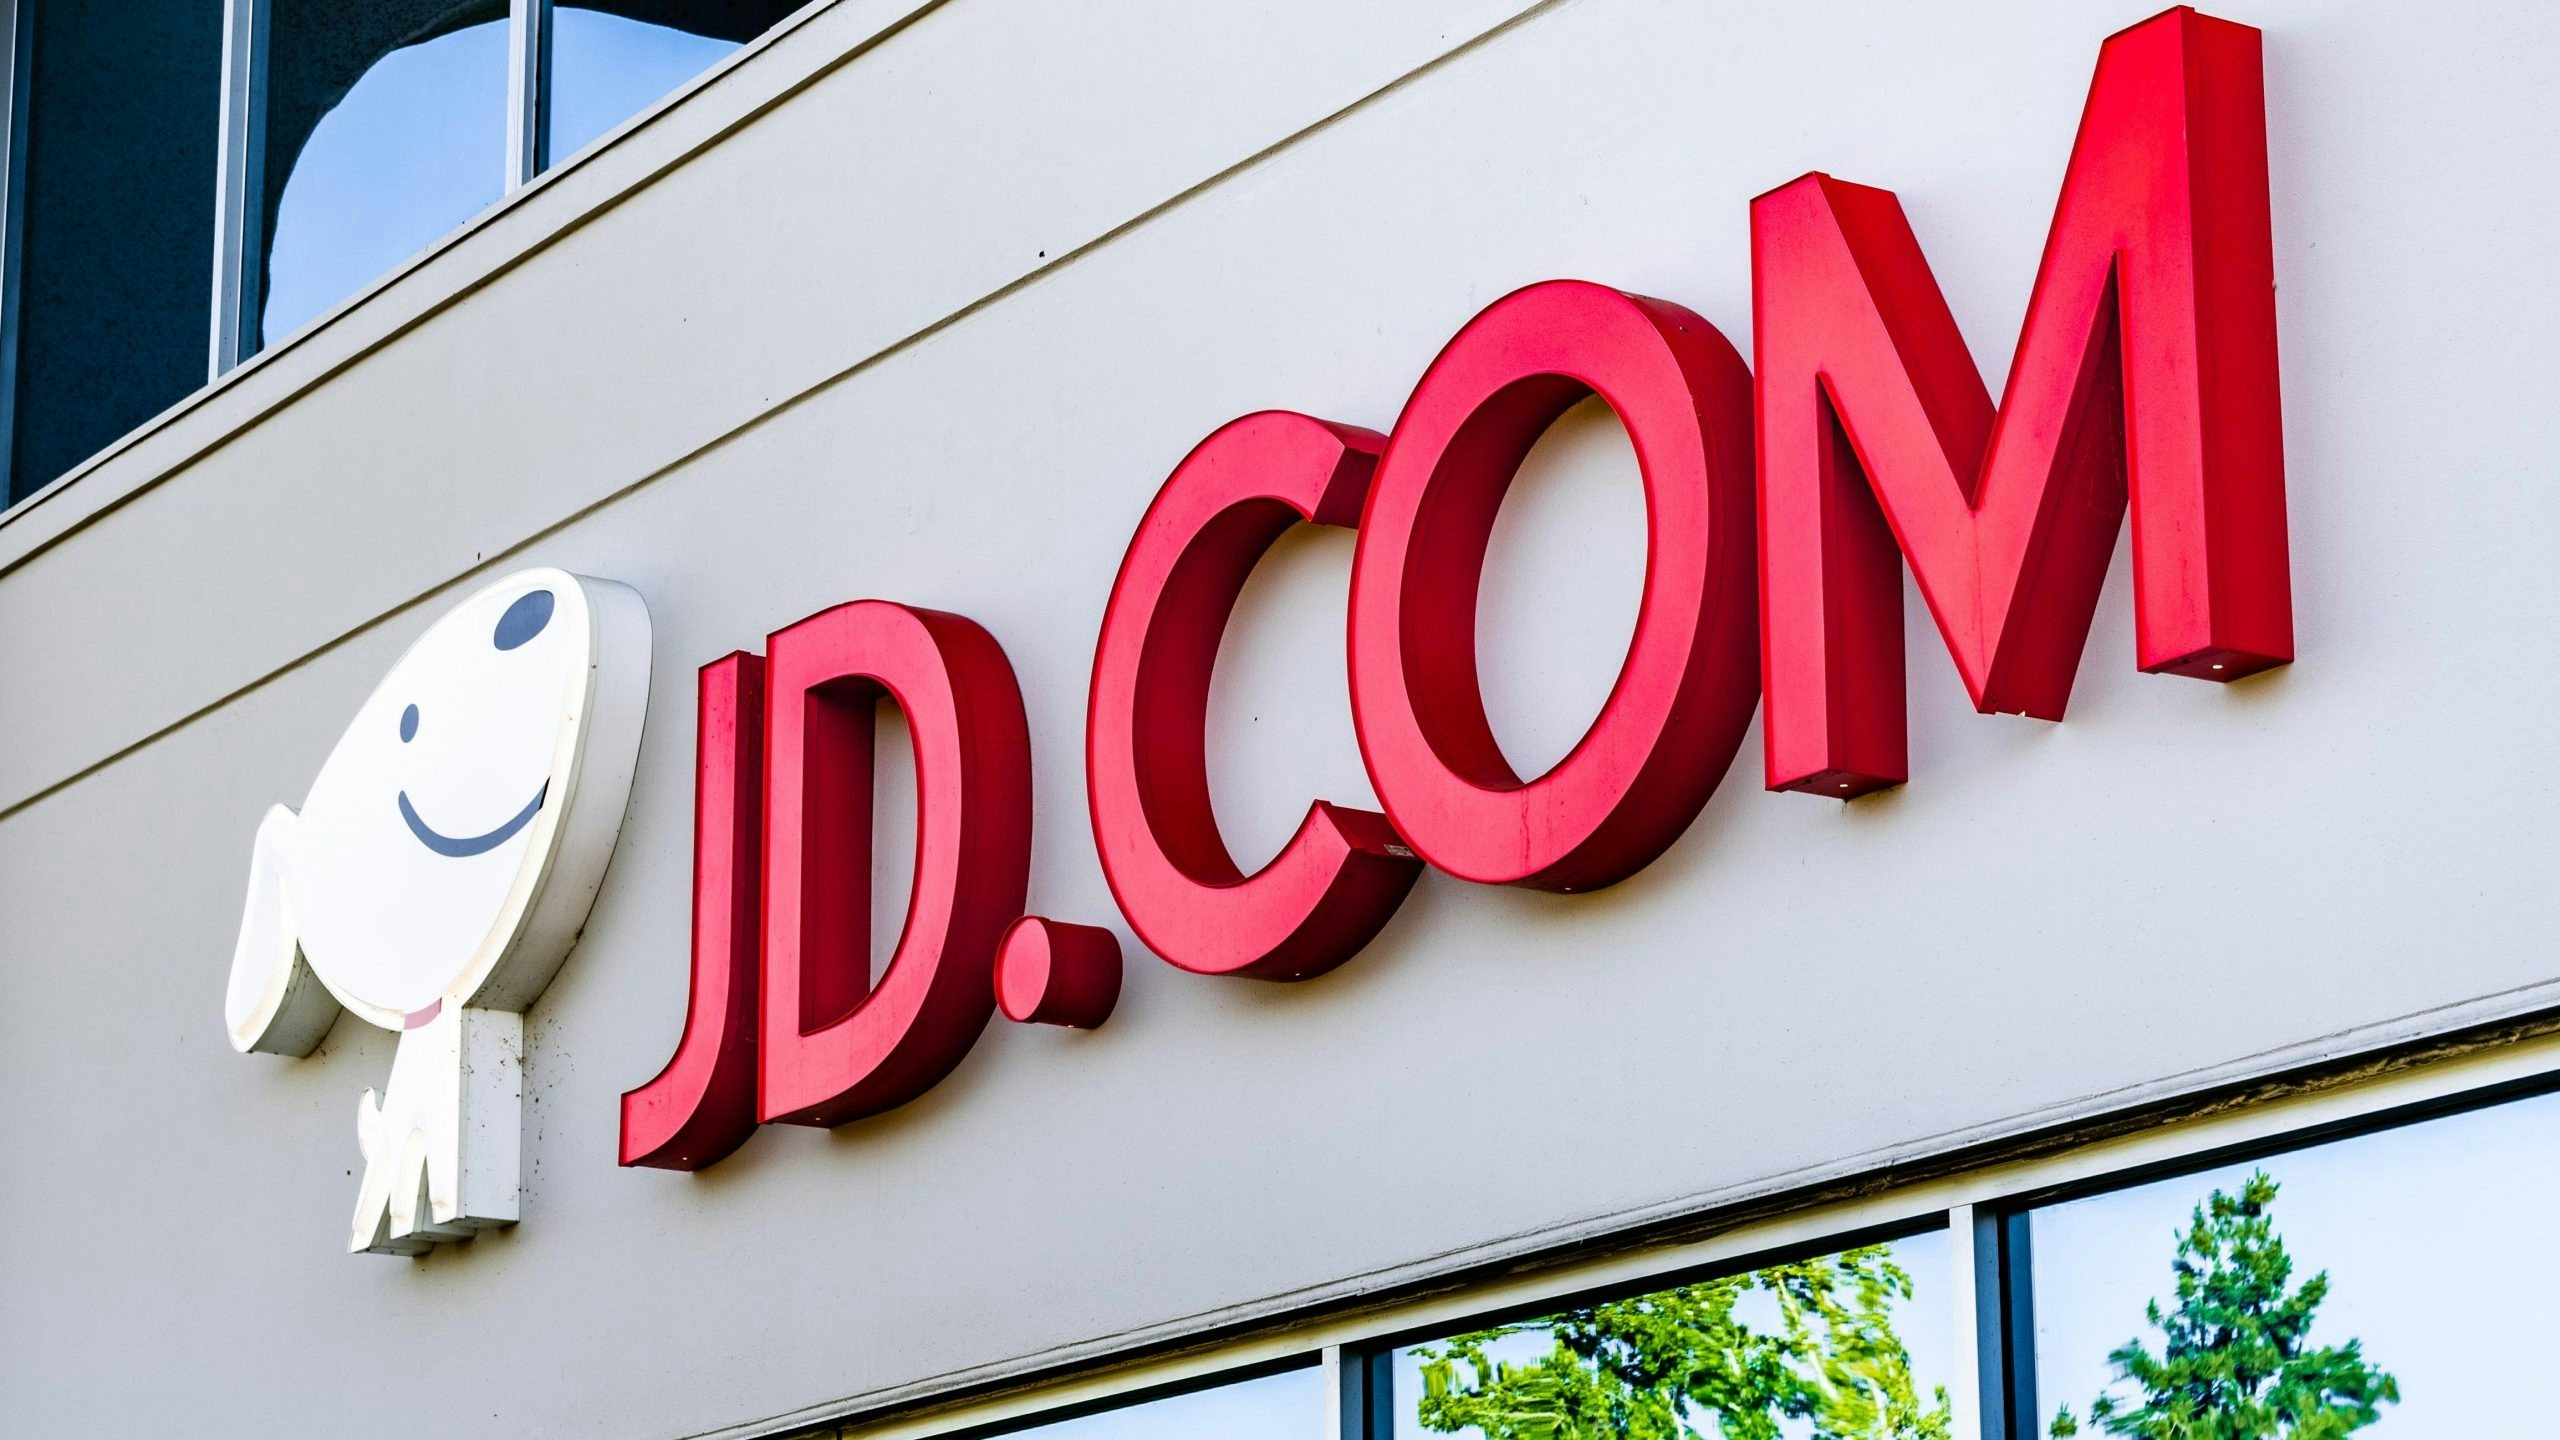 JD.com reportedly is taking on rival e-commerce platform Pinduoduo by launching a subsidy campaign. But is this a wise move? Photo: Shutterstock